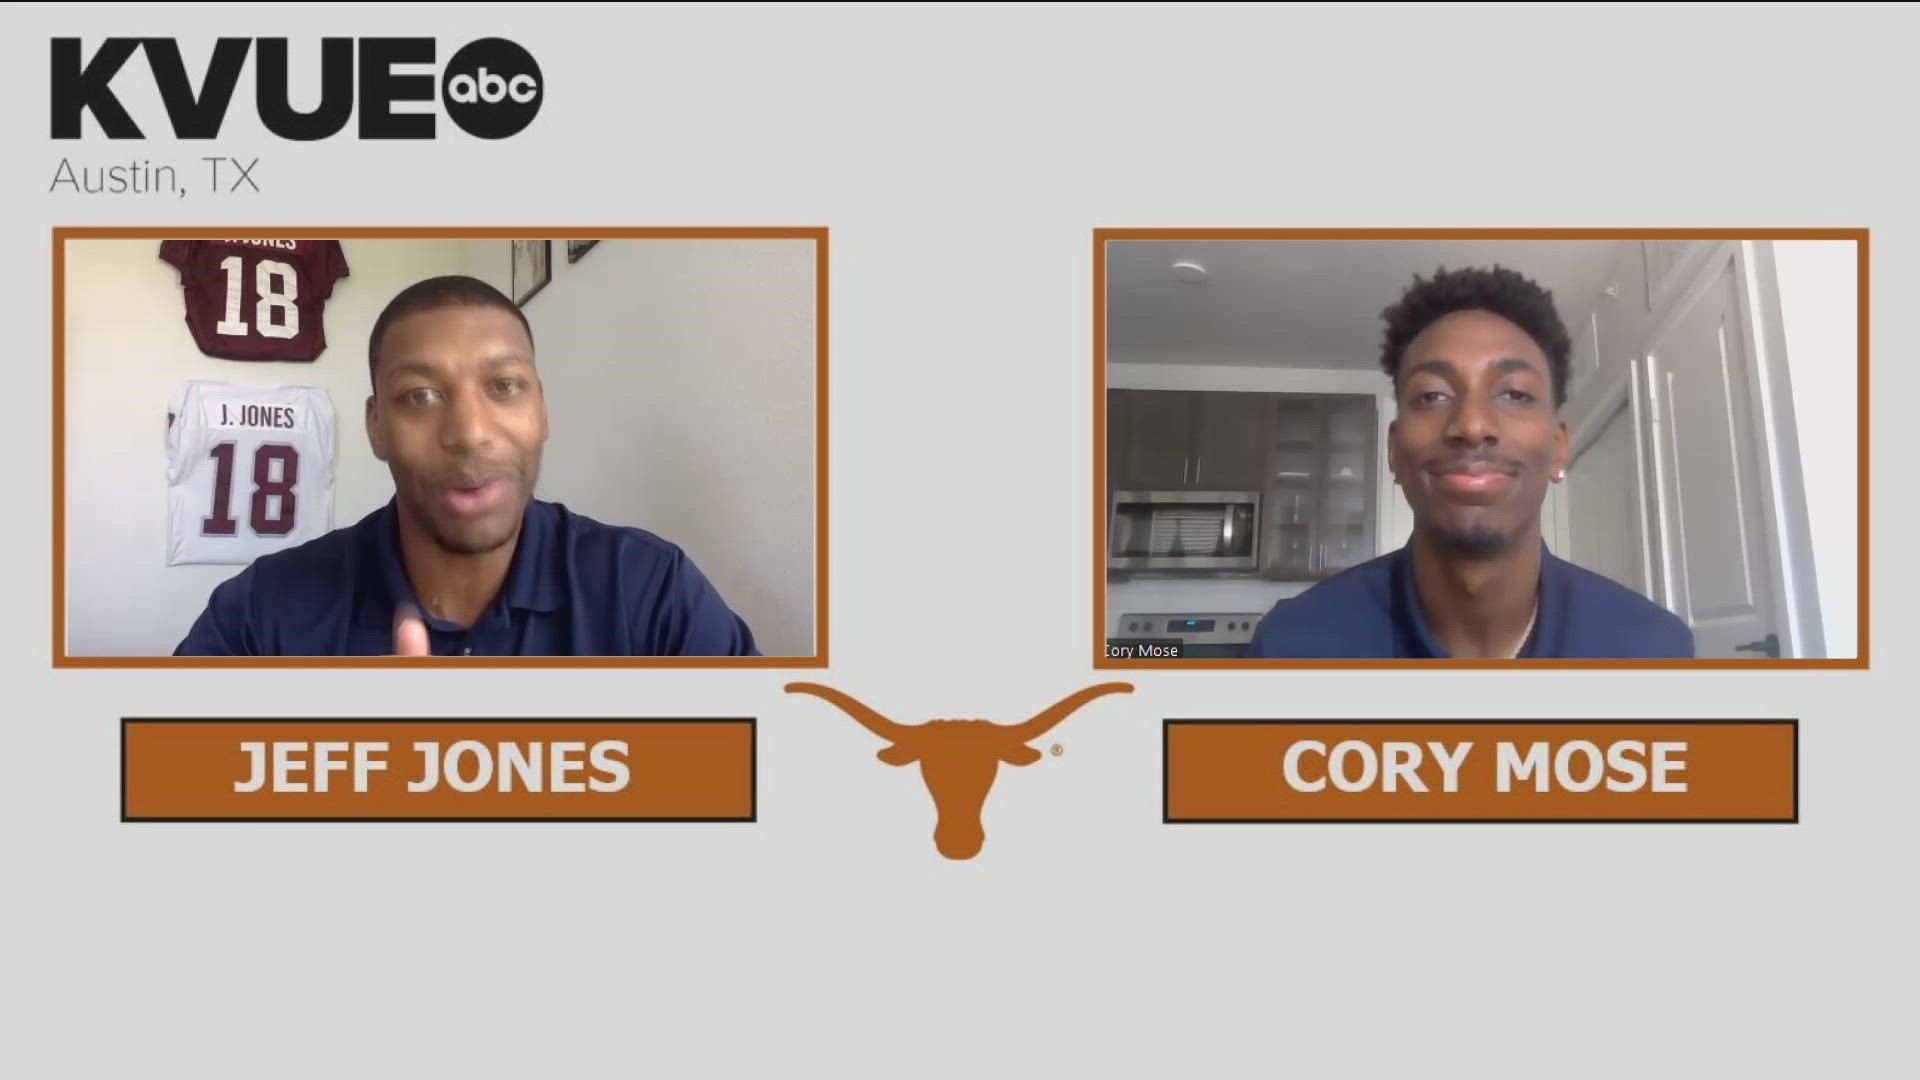 The KVUE Sports team discusses the Texas Longhorns Week 4 matchup against Texas Tech and provides predictions for the final score.